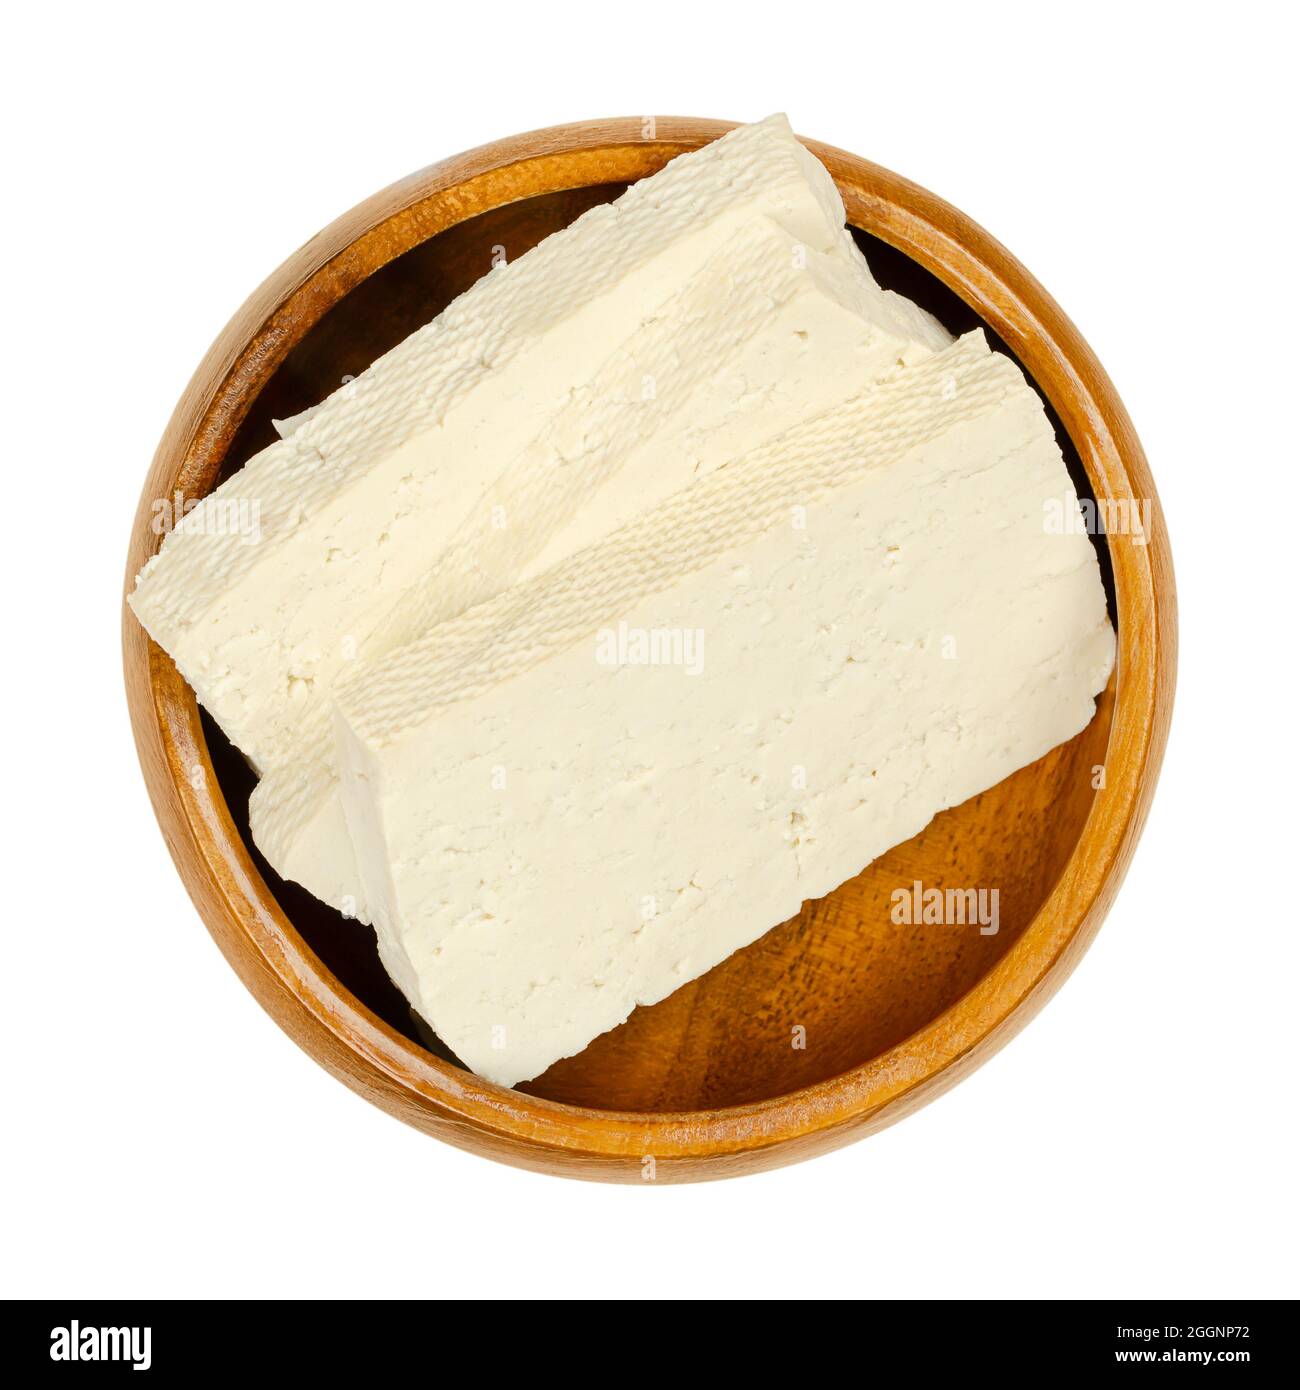 Slices of white tofu, in a wooden bowl. Sliced bean curd, coagulated soy milk, pressed into white blocks of different softness. Stock Photo